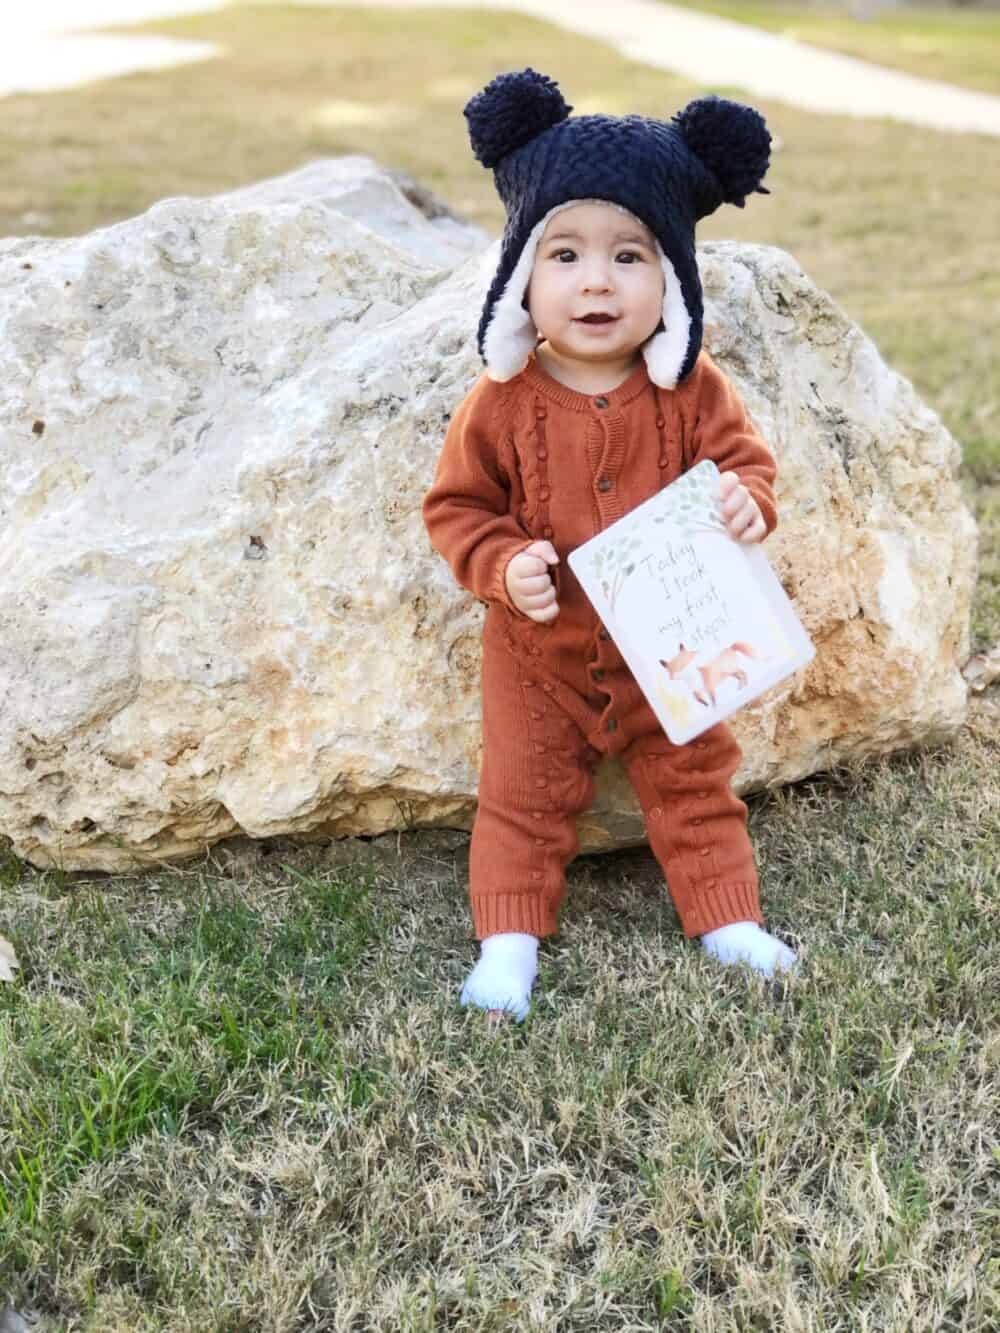 A baby wearing a hat and holding a book.